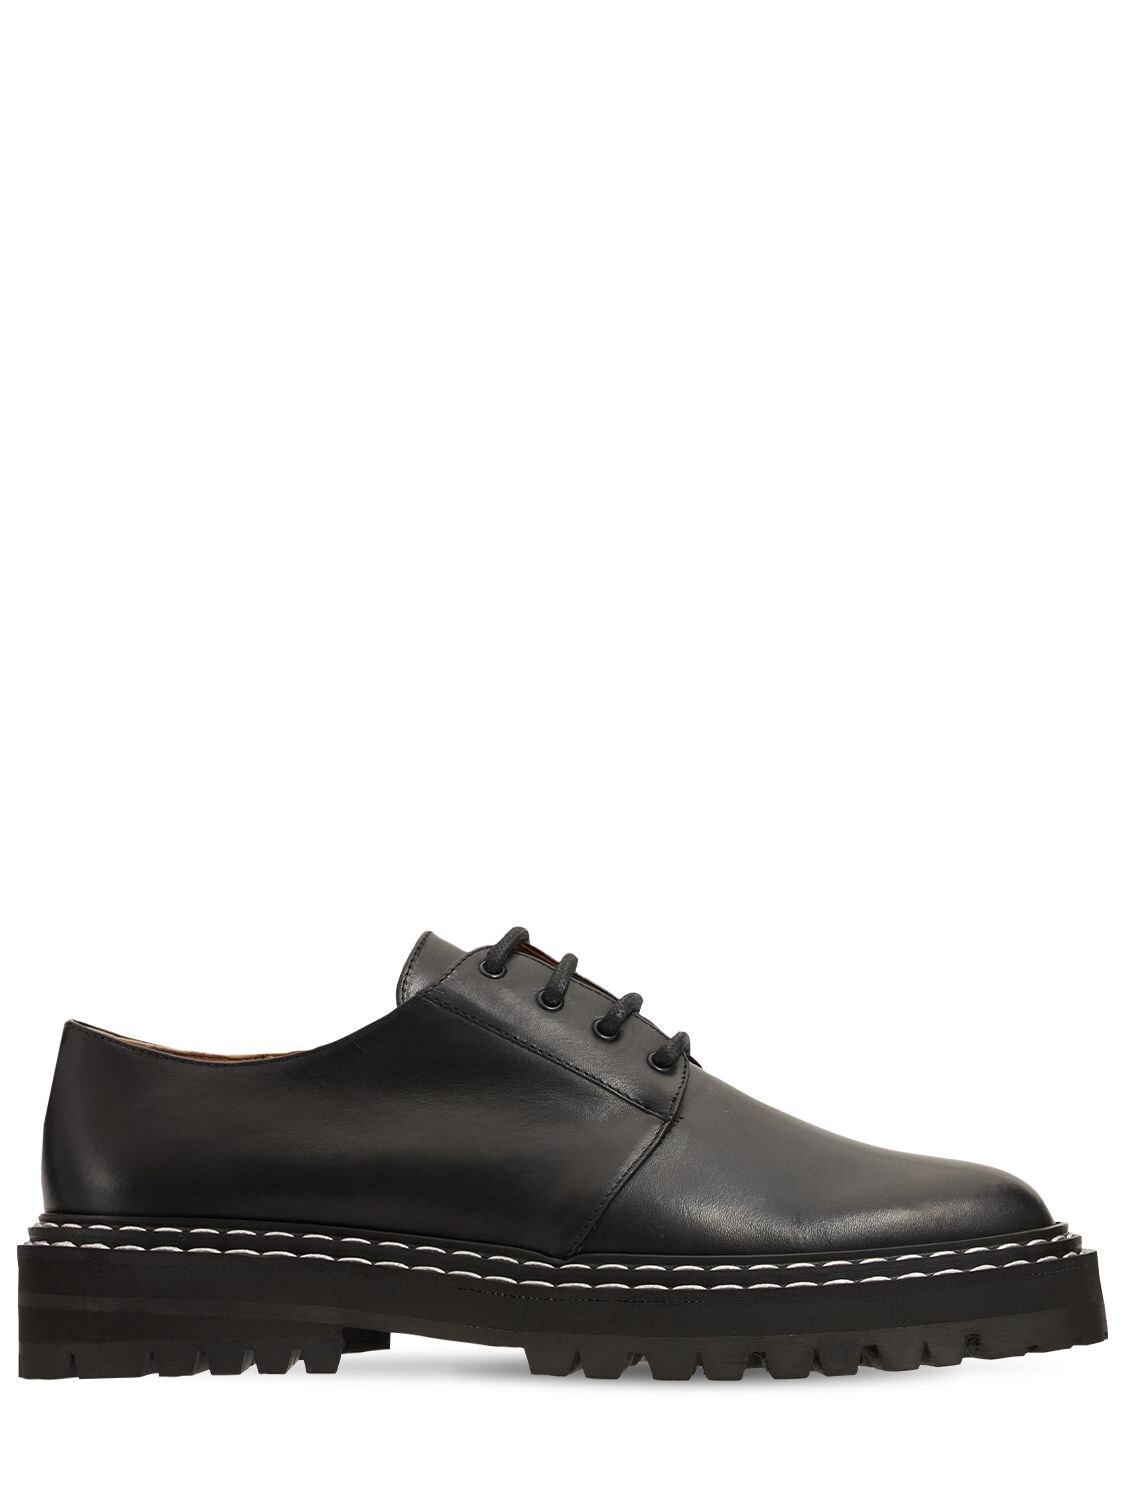 ATP ATELIER 20mm Maglie Leather Shoes